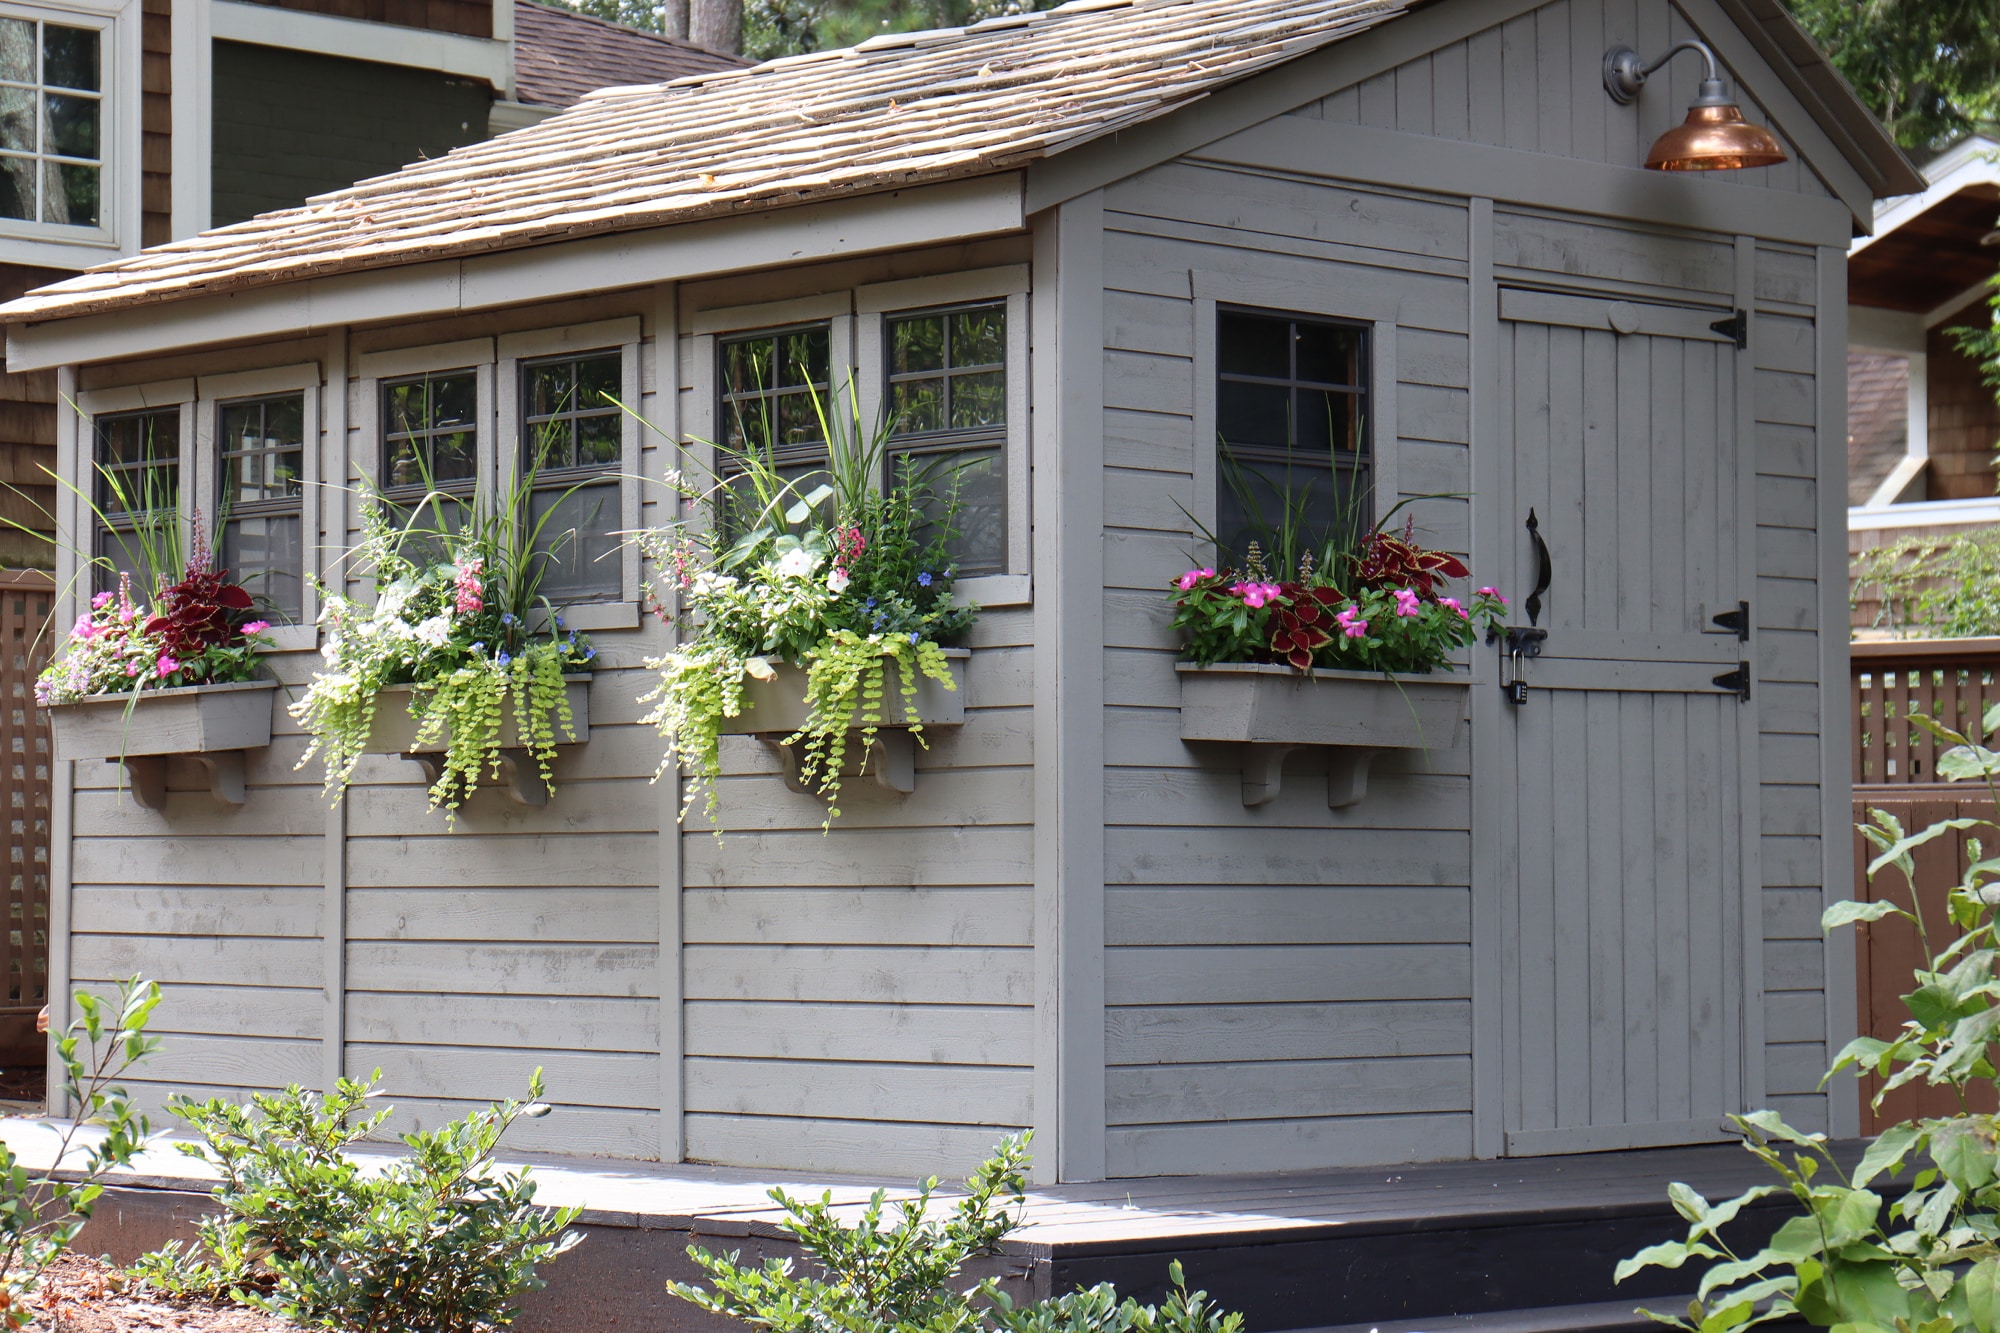 Backyard shed with window boxes